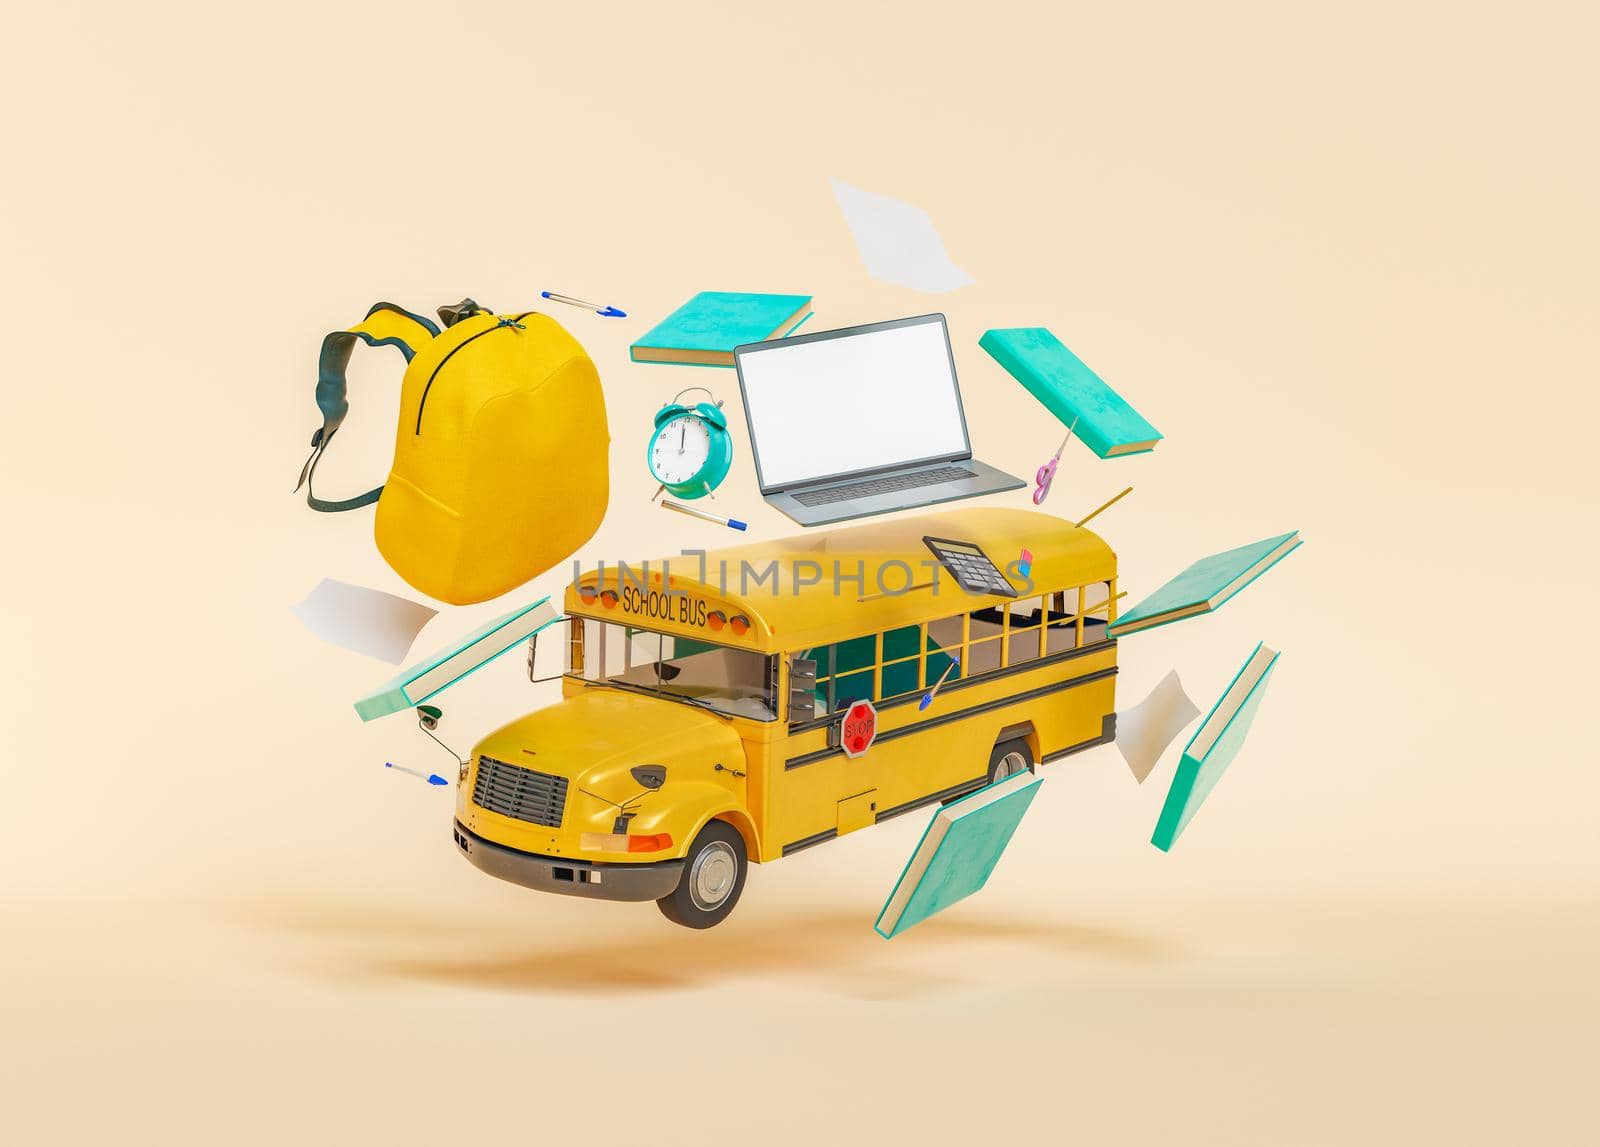 3D rendering of bus and school supplies by asolano